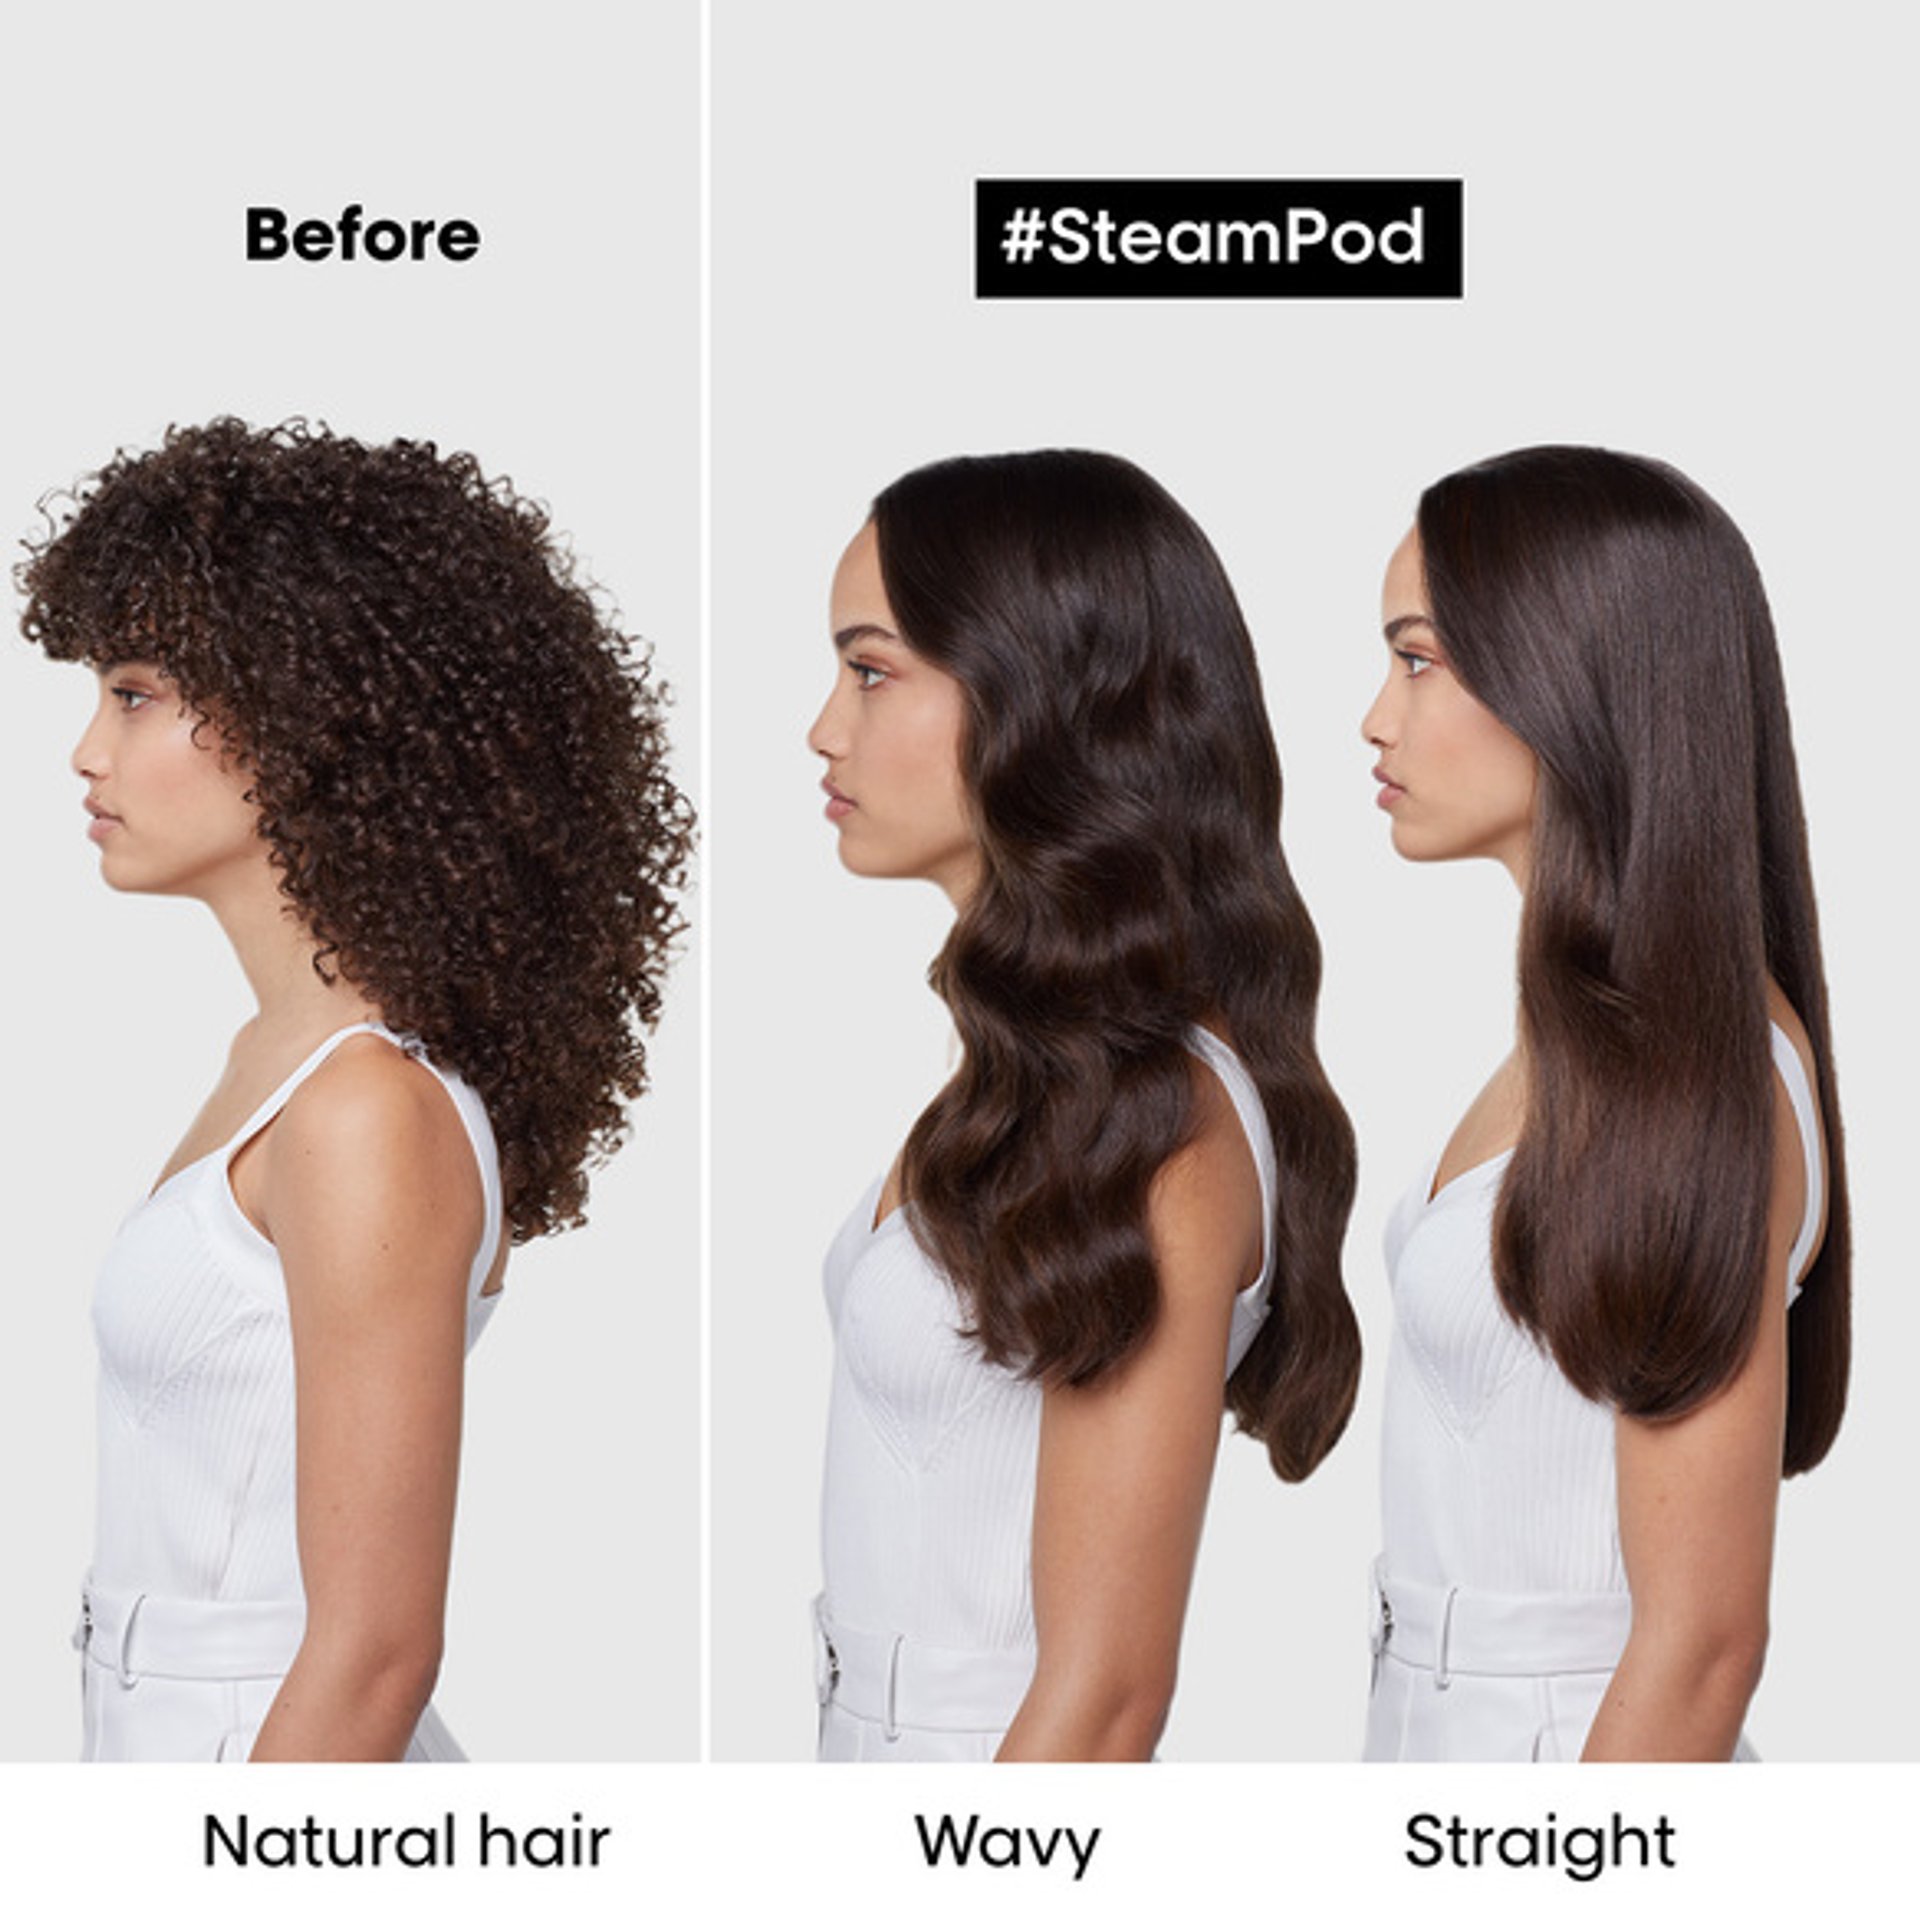 SteamPod 4 the professional steam styler by L'Oréal Professionnel.